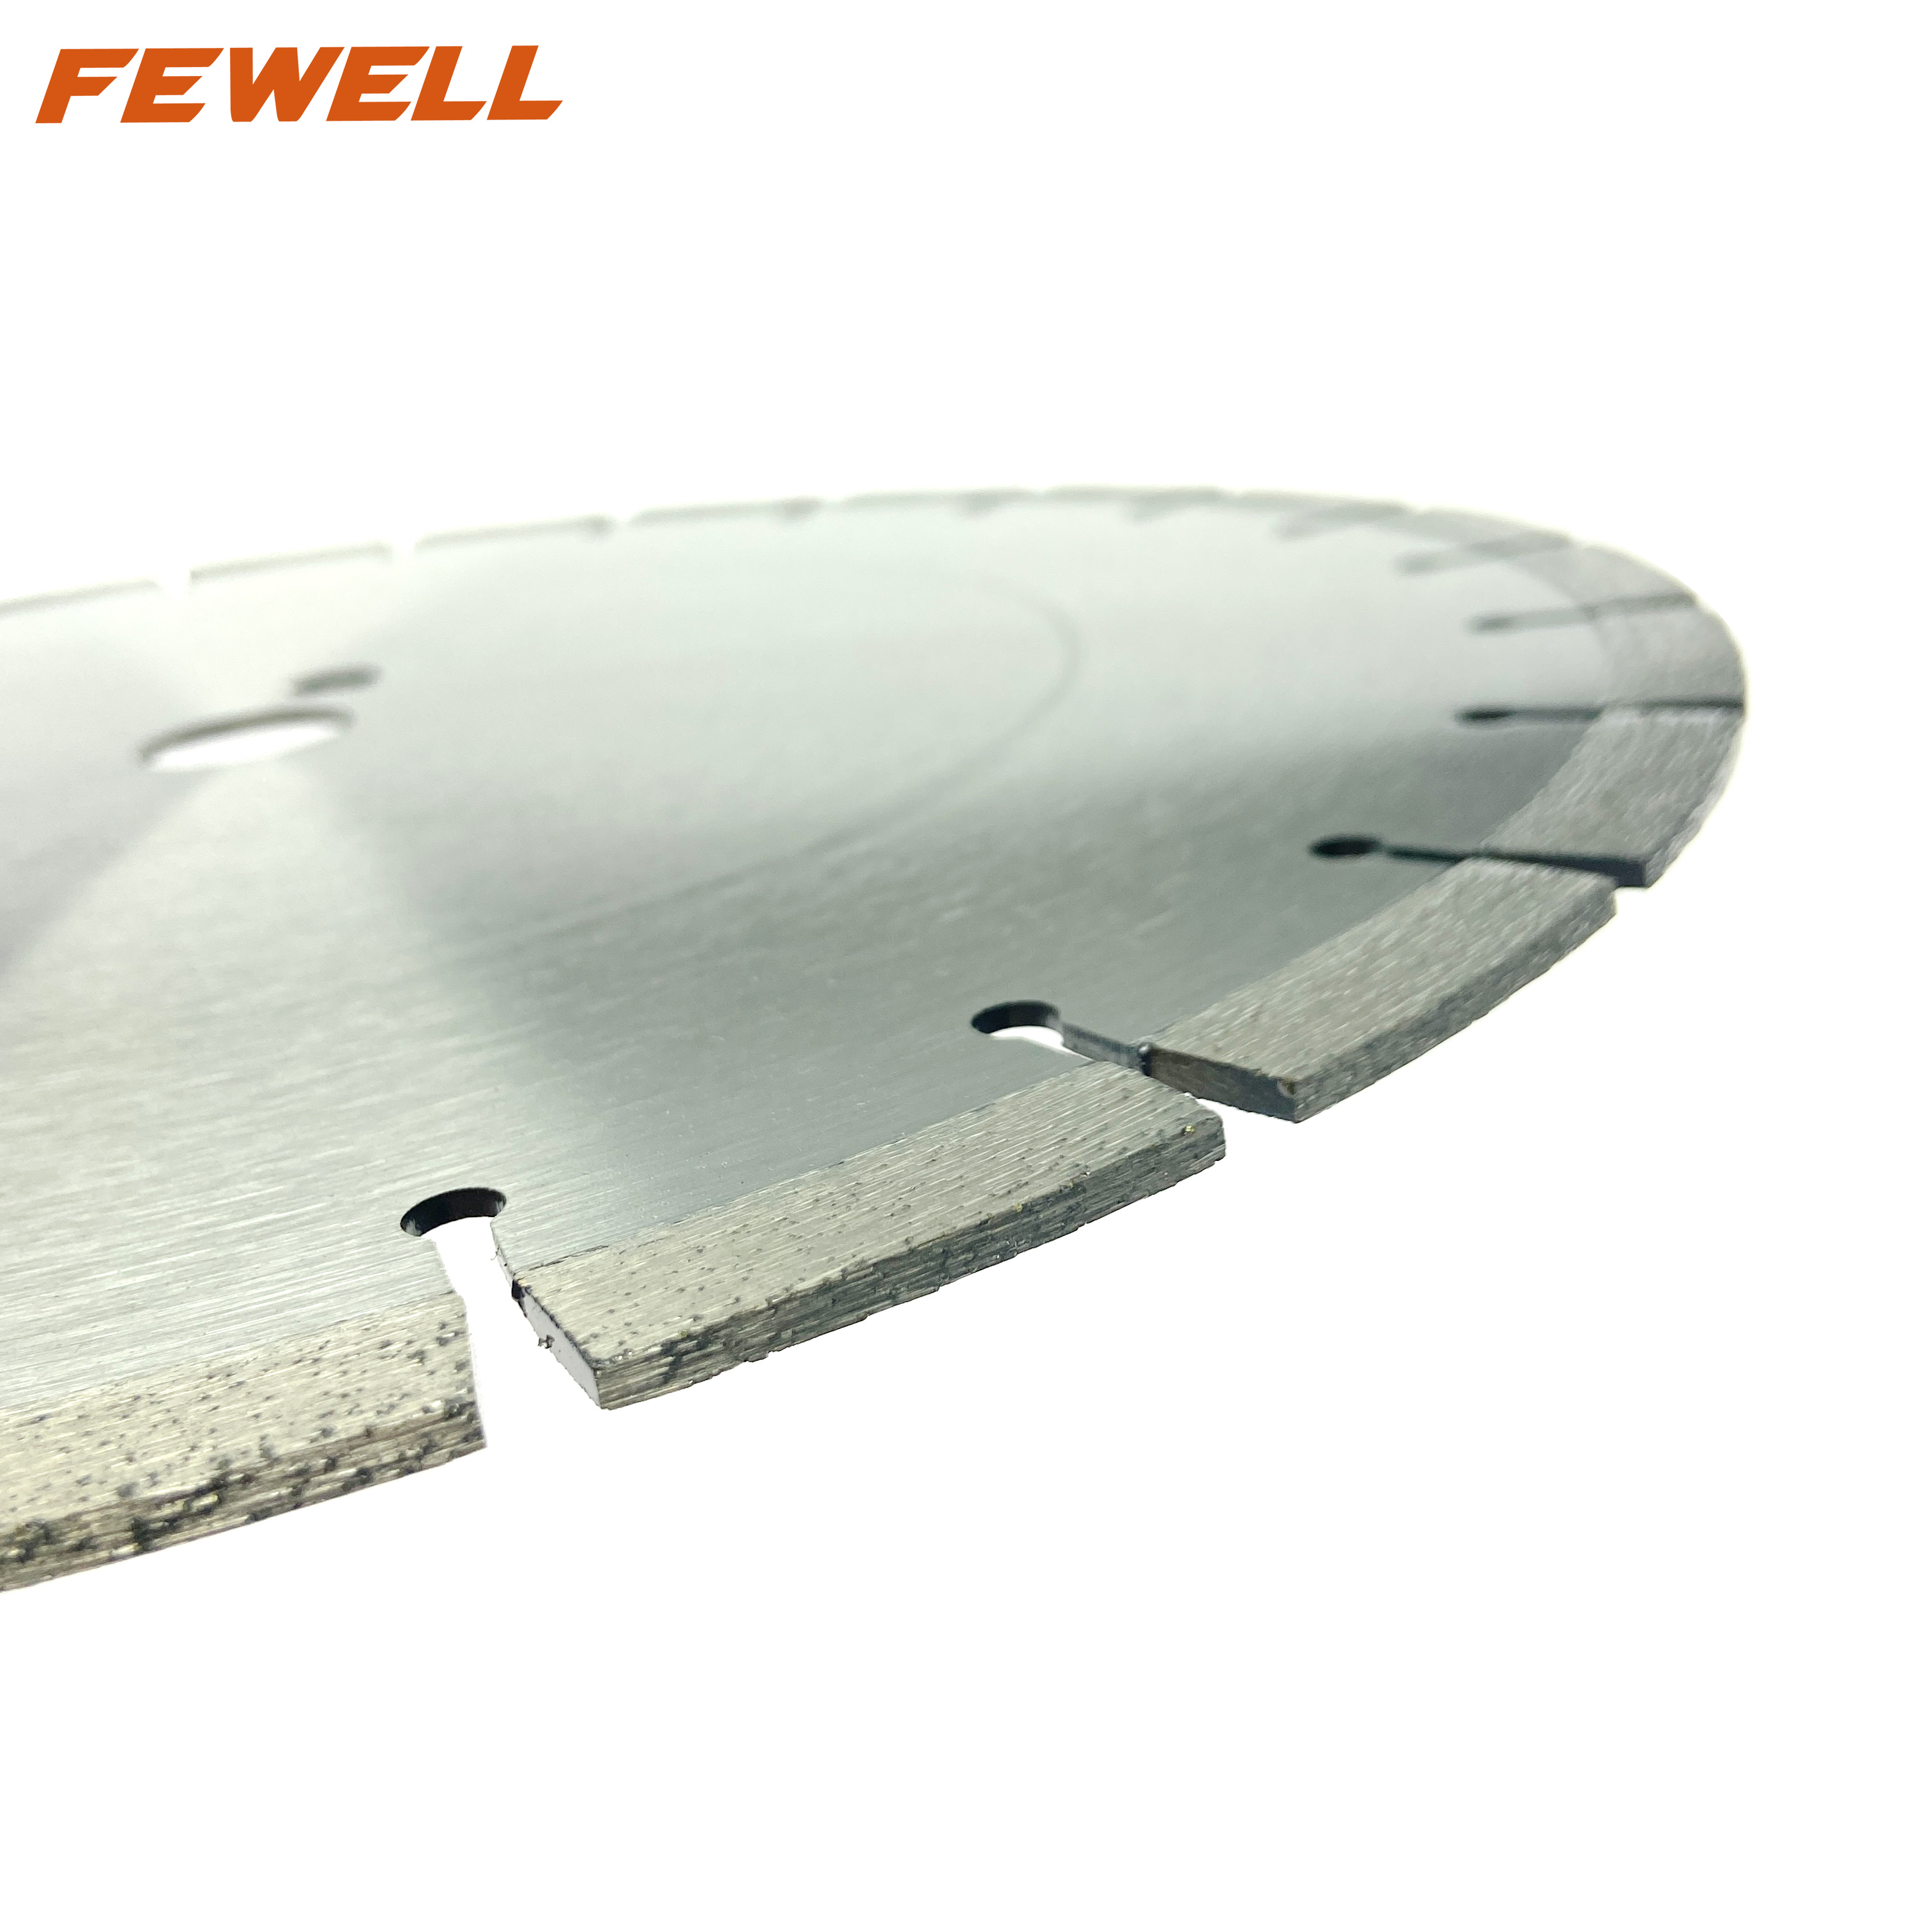 Laser welded 14inch 350*3.2*12*25.4 diamond cutter saw blade for cutting reinforced concrete wall